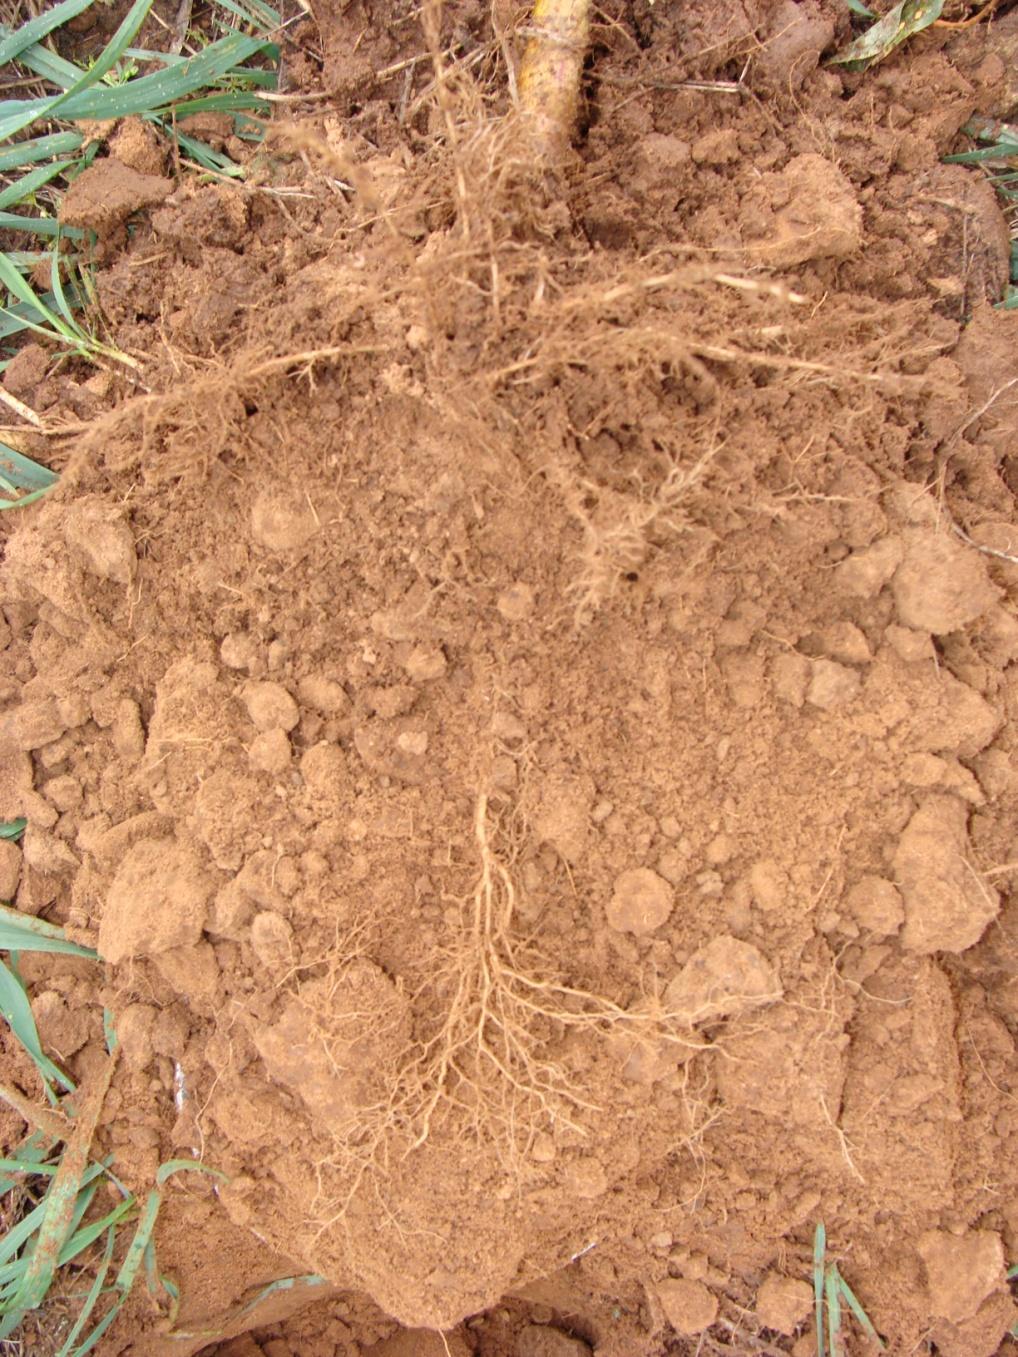 Soil Structure Tap rooted cover crops